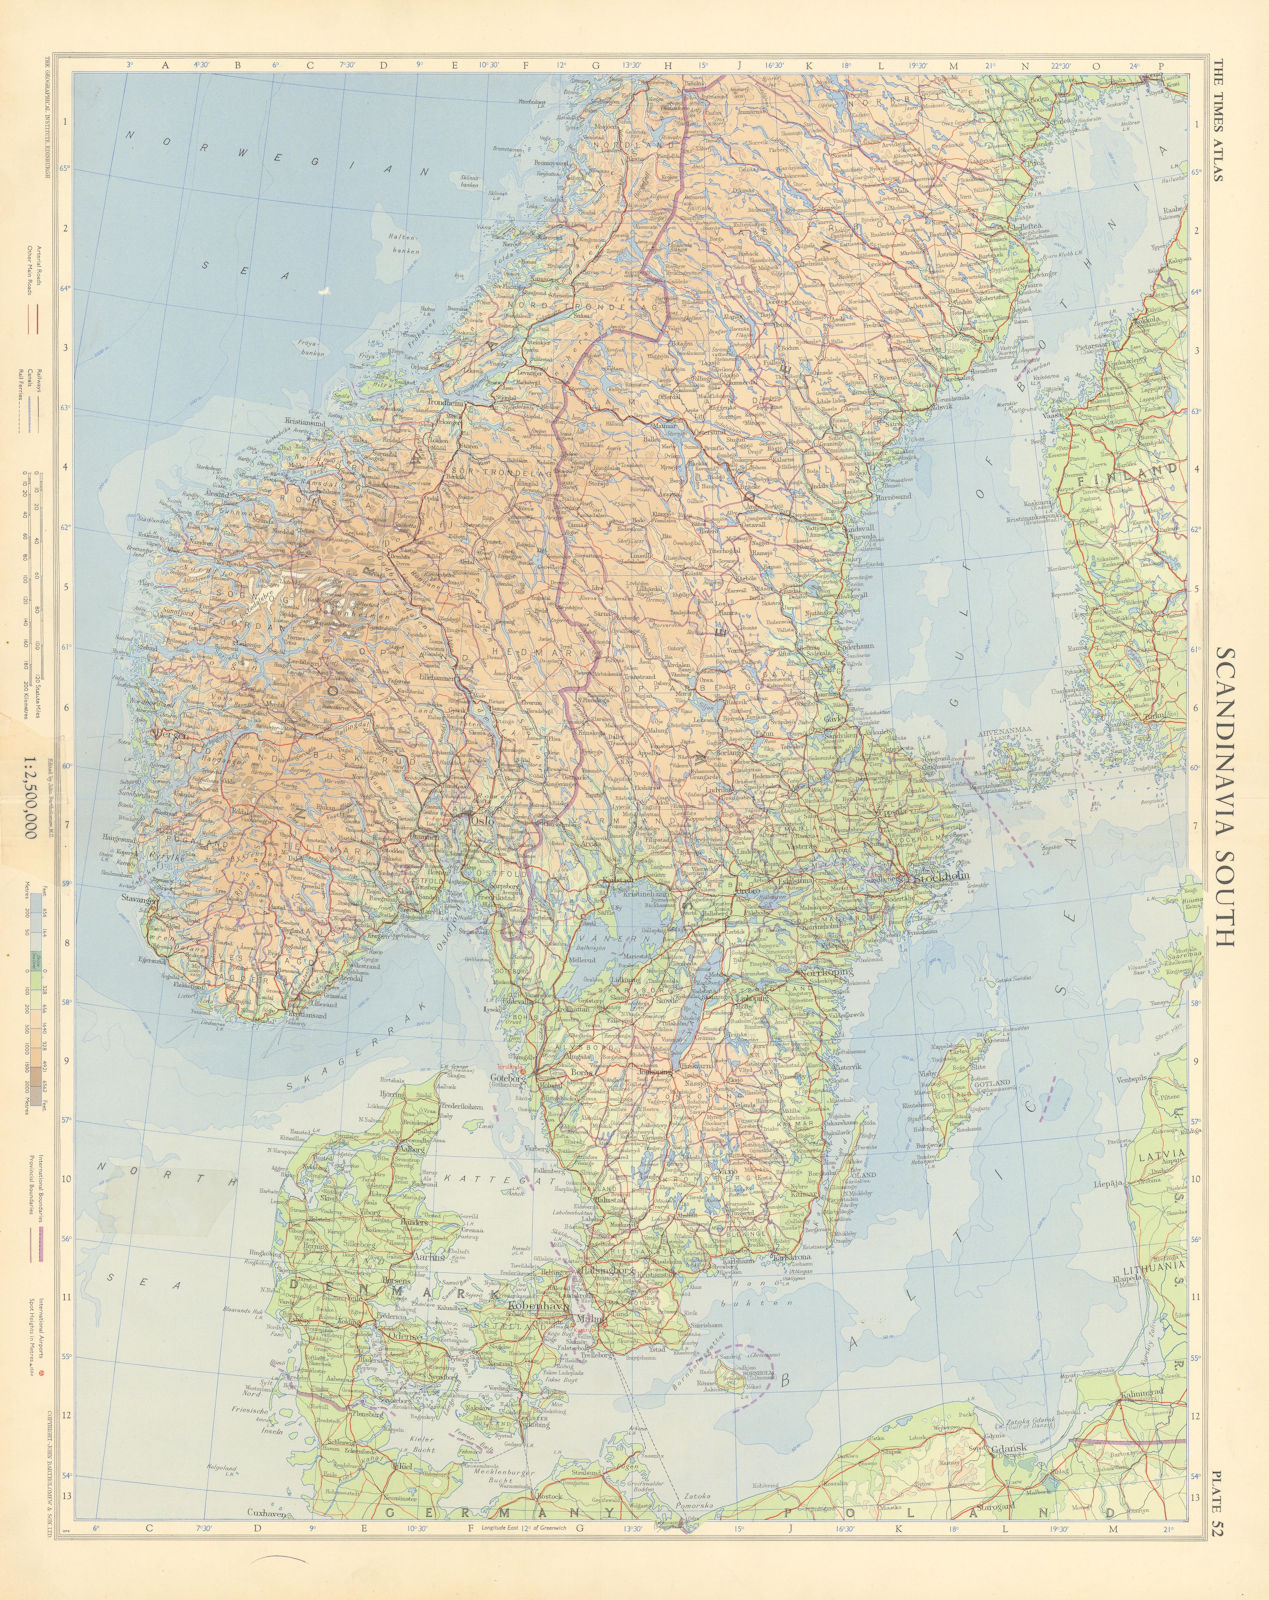 Associate Product Southern Scandinavia. Norway Sweden Denmark. TIMES 1955 old vintage map chart